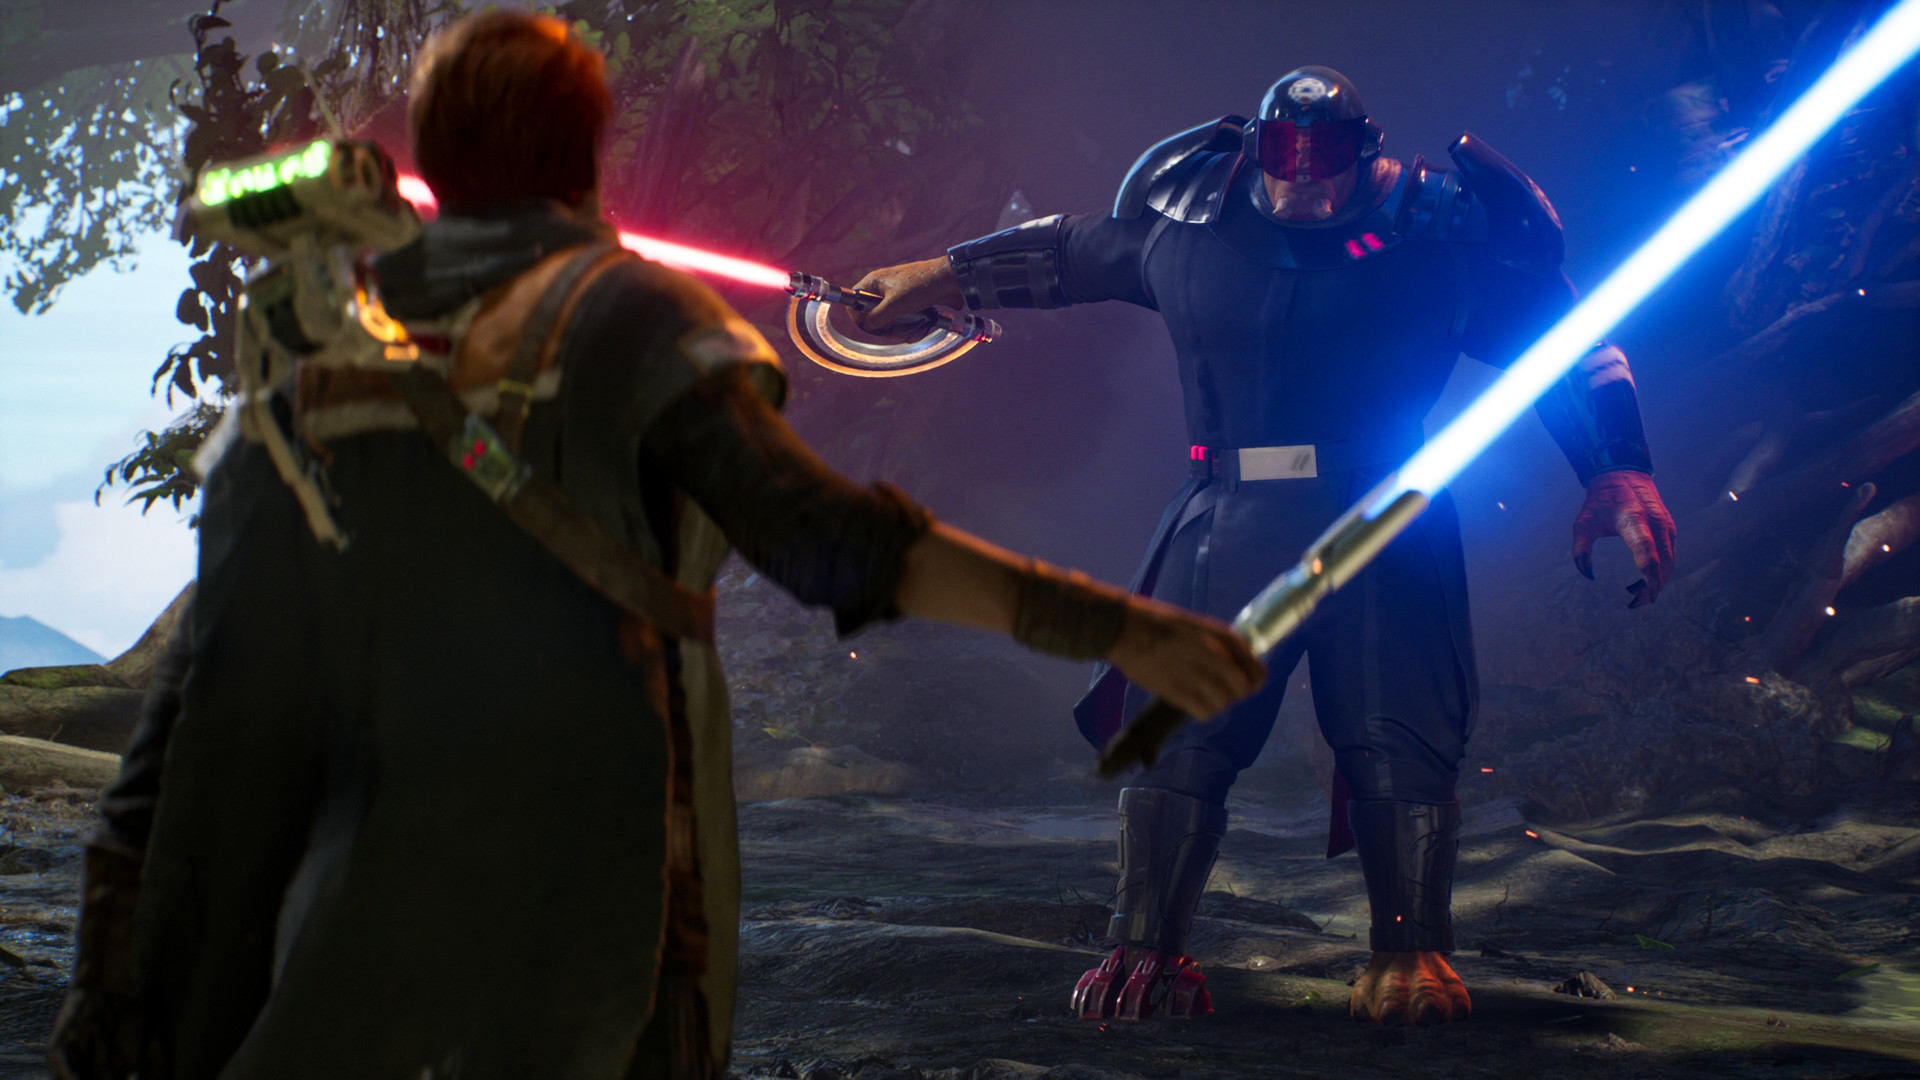 Star Wars Jedi: Survivor (PS5) Review — Forever Classic Games